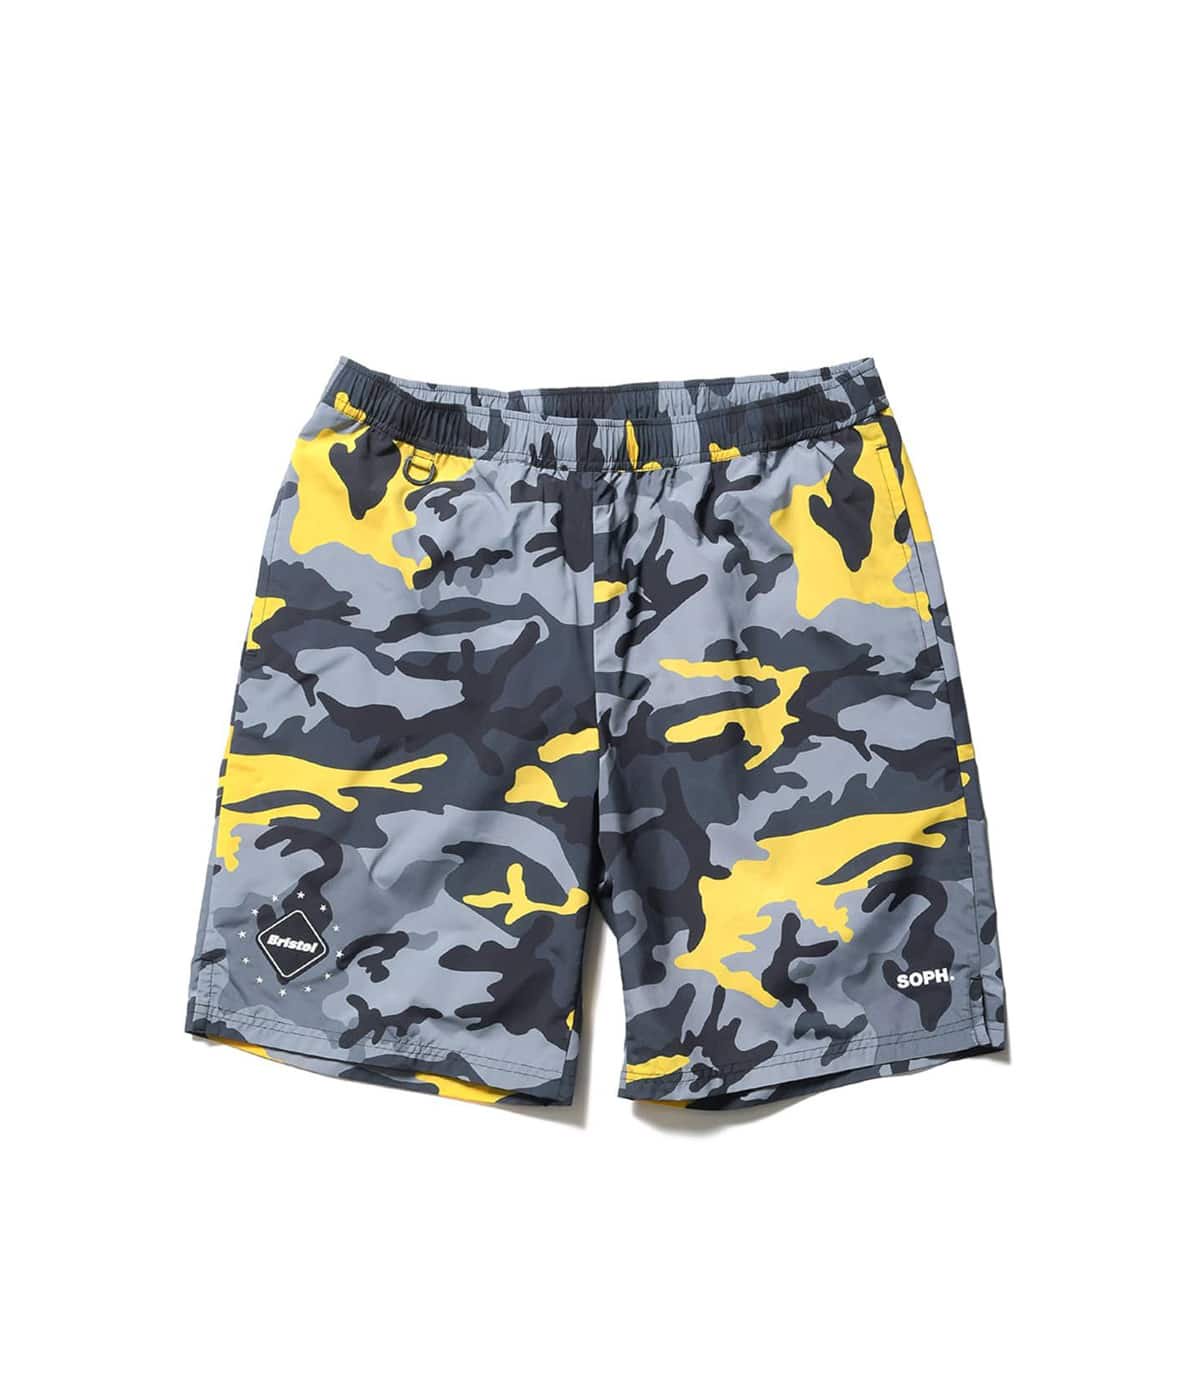 FCRB x NIKE BRISTOL CAMOUFLAGE  SHORTS M